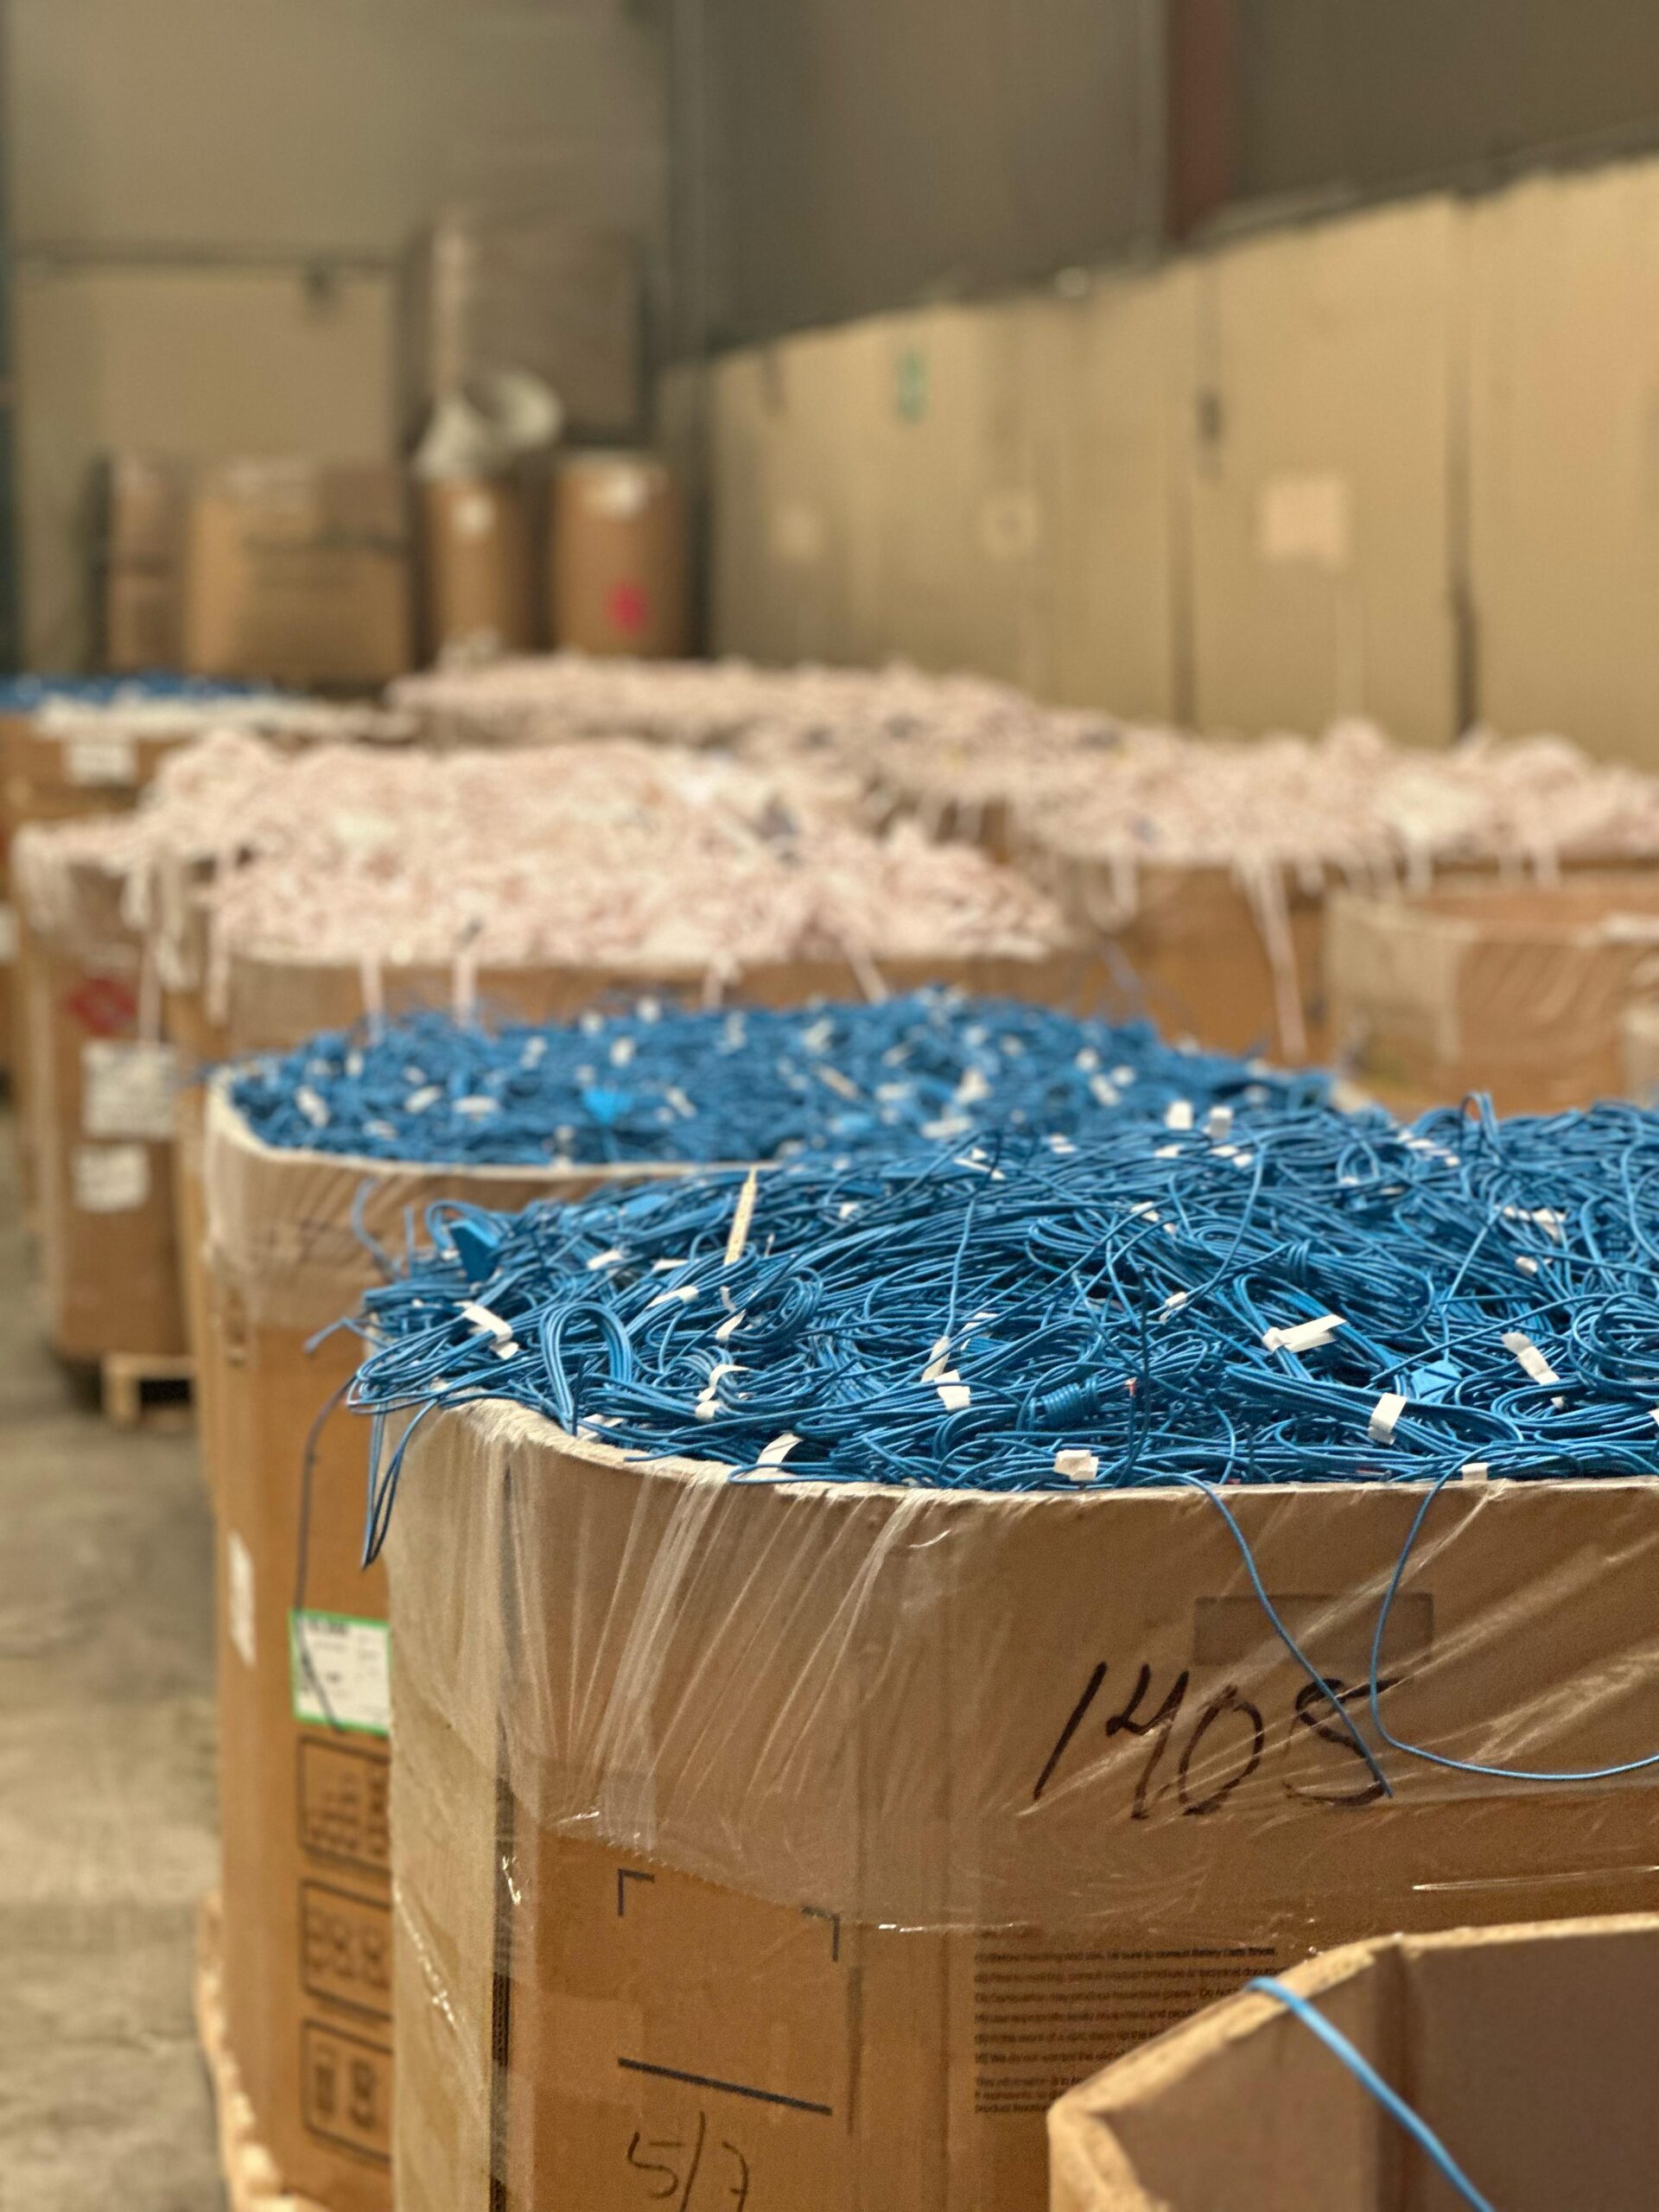 A pile of blue electrical wires in cardboard boxes in a warehouse.